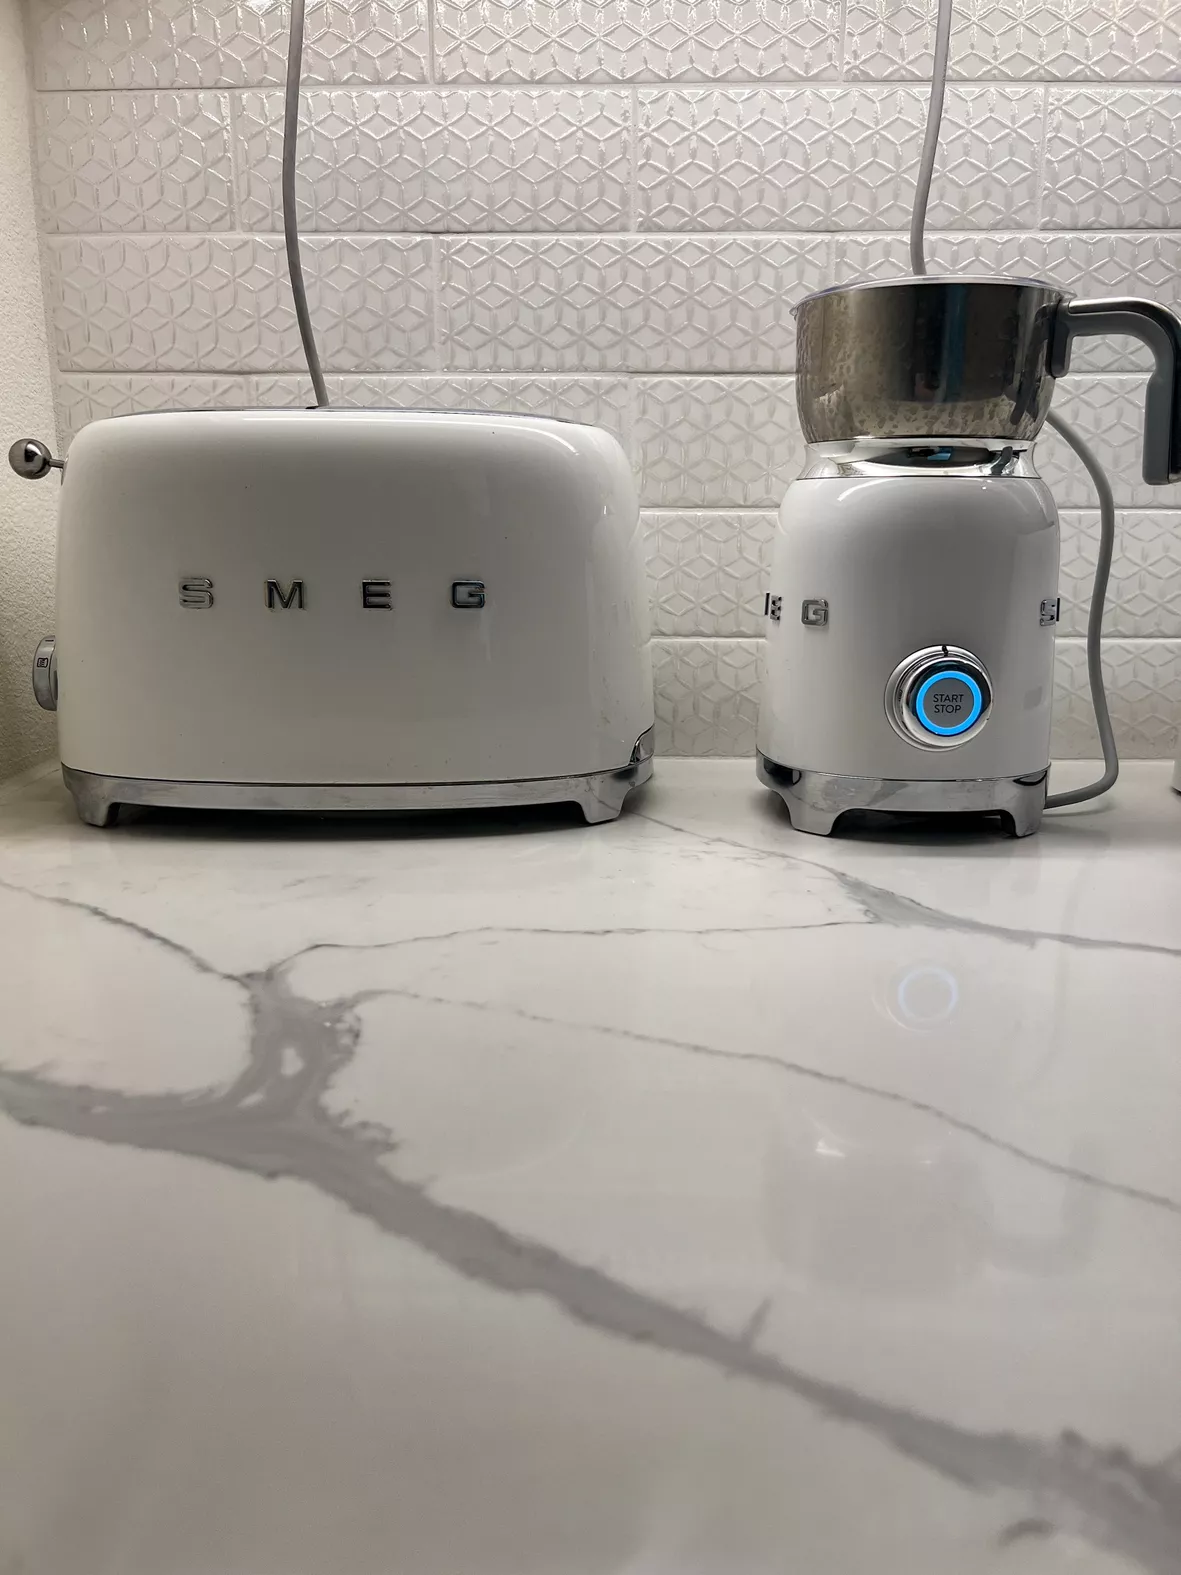 Smeg milk frother and hot chocolate maker